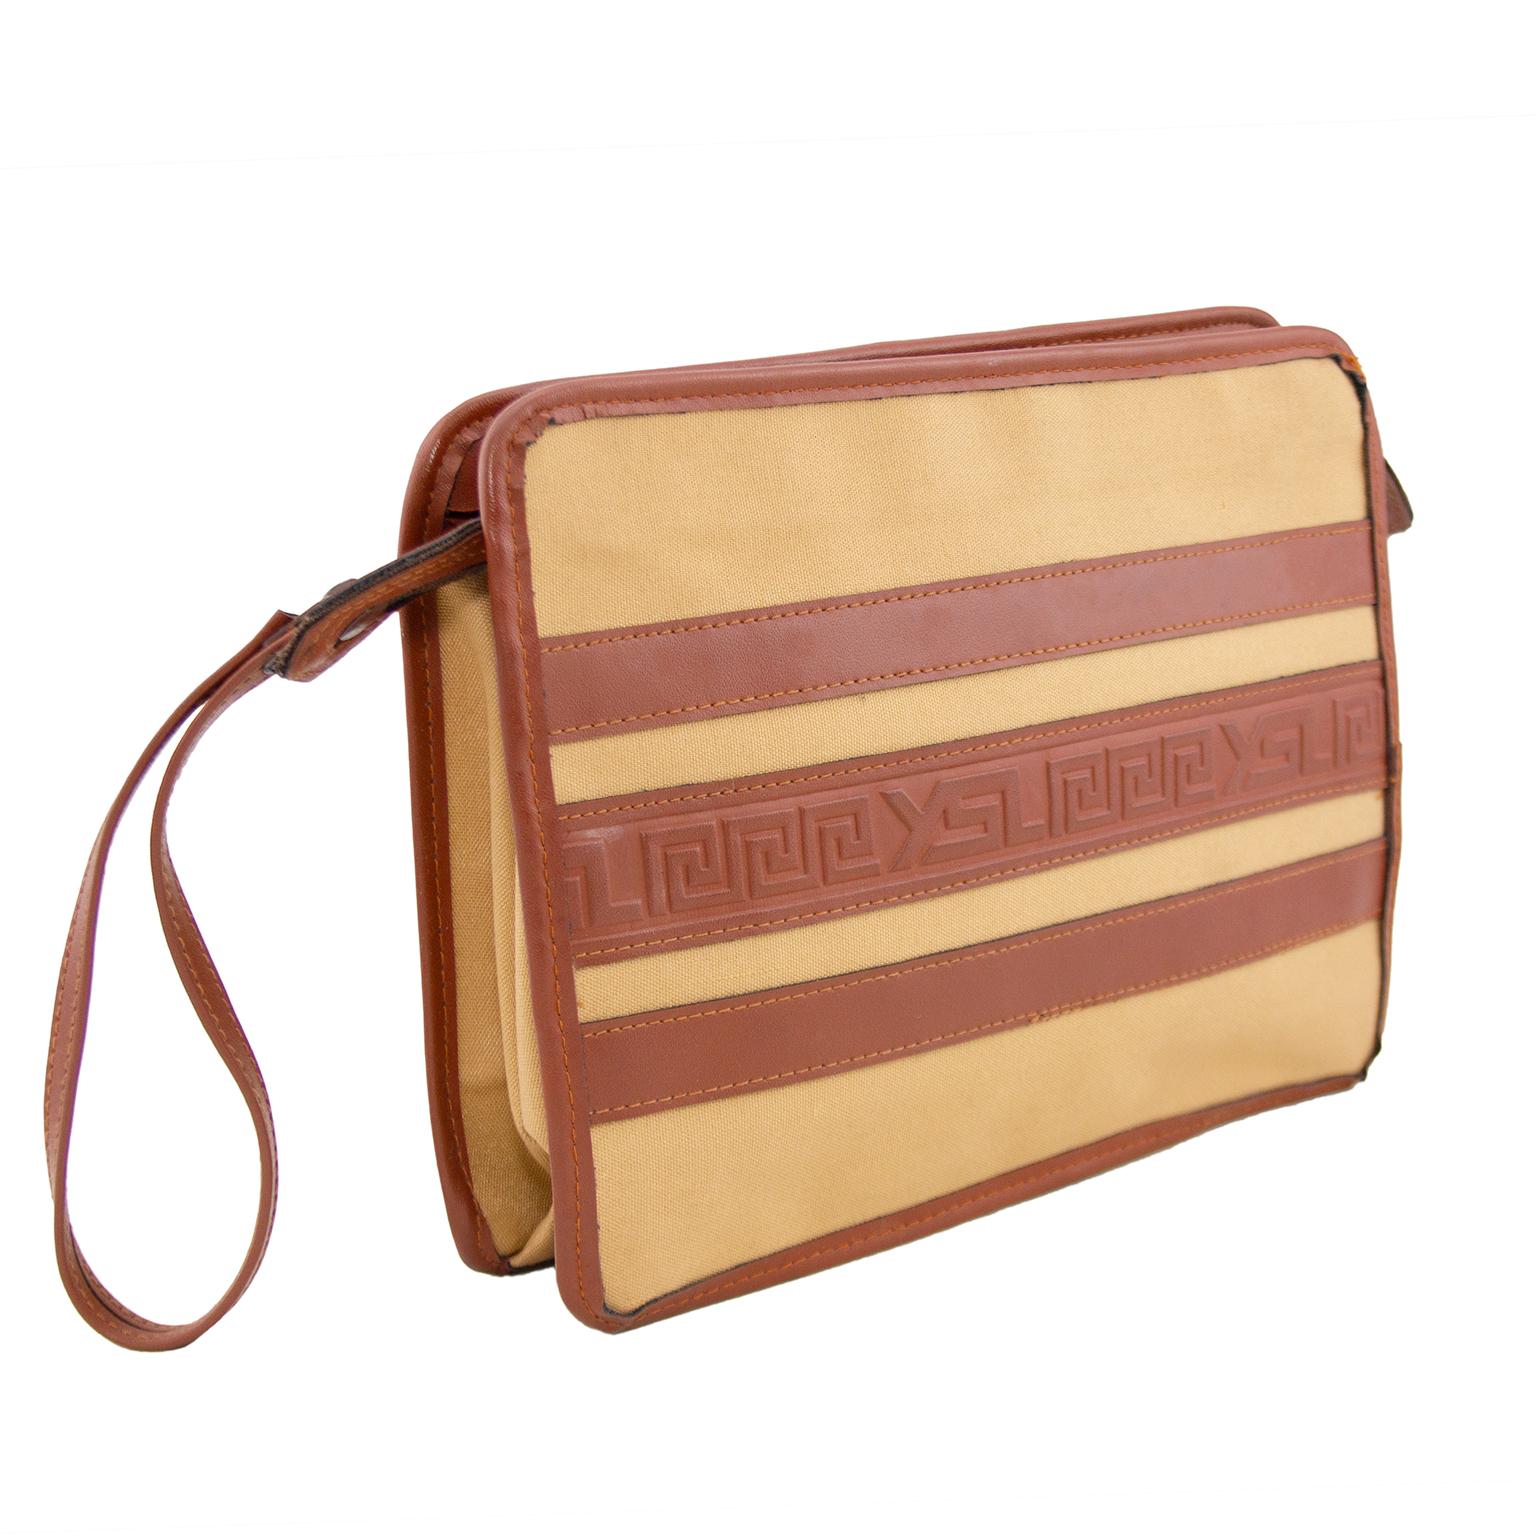 1980s Yves Saint Lauren tan leather and beige canvas clutch/wristlet. Rectangular shape with tan leather trim and horizontal stripes of tan leather. Middle stripe is embossed with greek key details with YSL throughout. Brown top zipper closure and